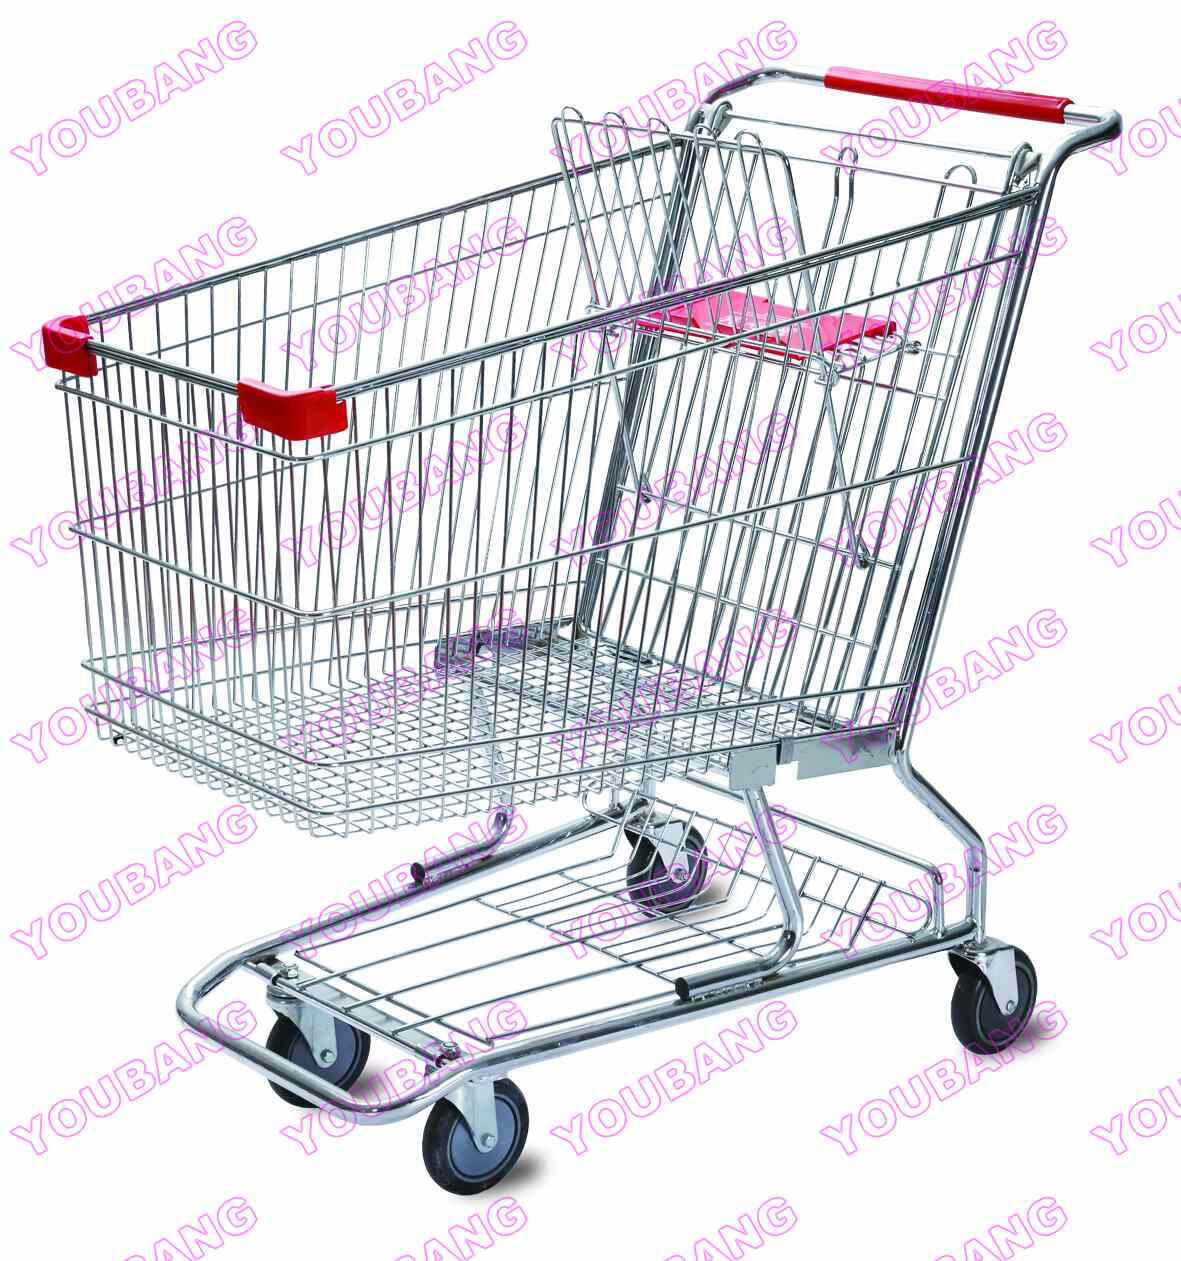 Supermarket Shopping Trolley with 5 inch Castor